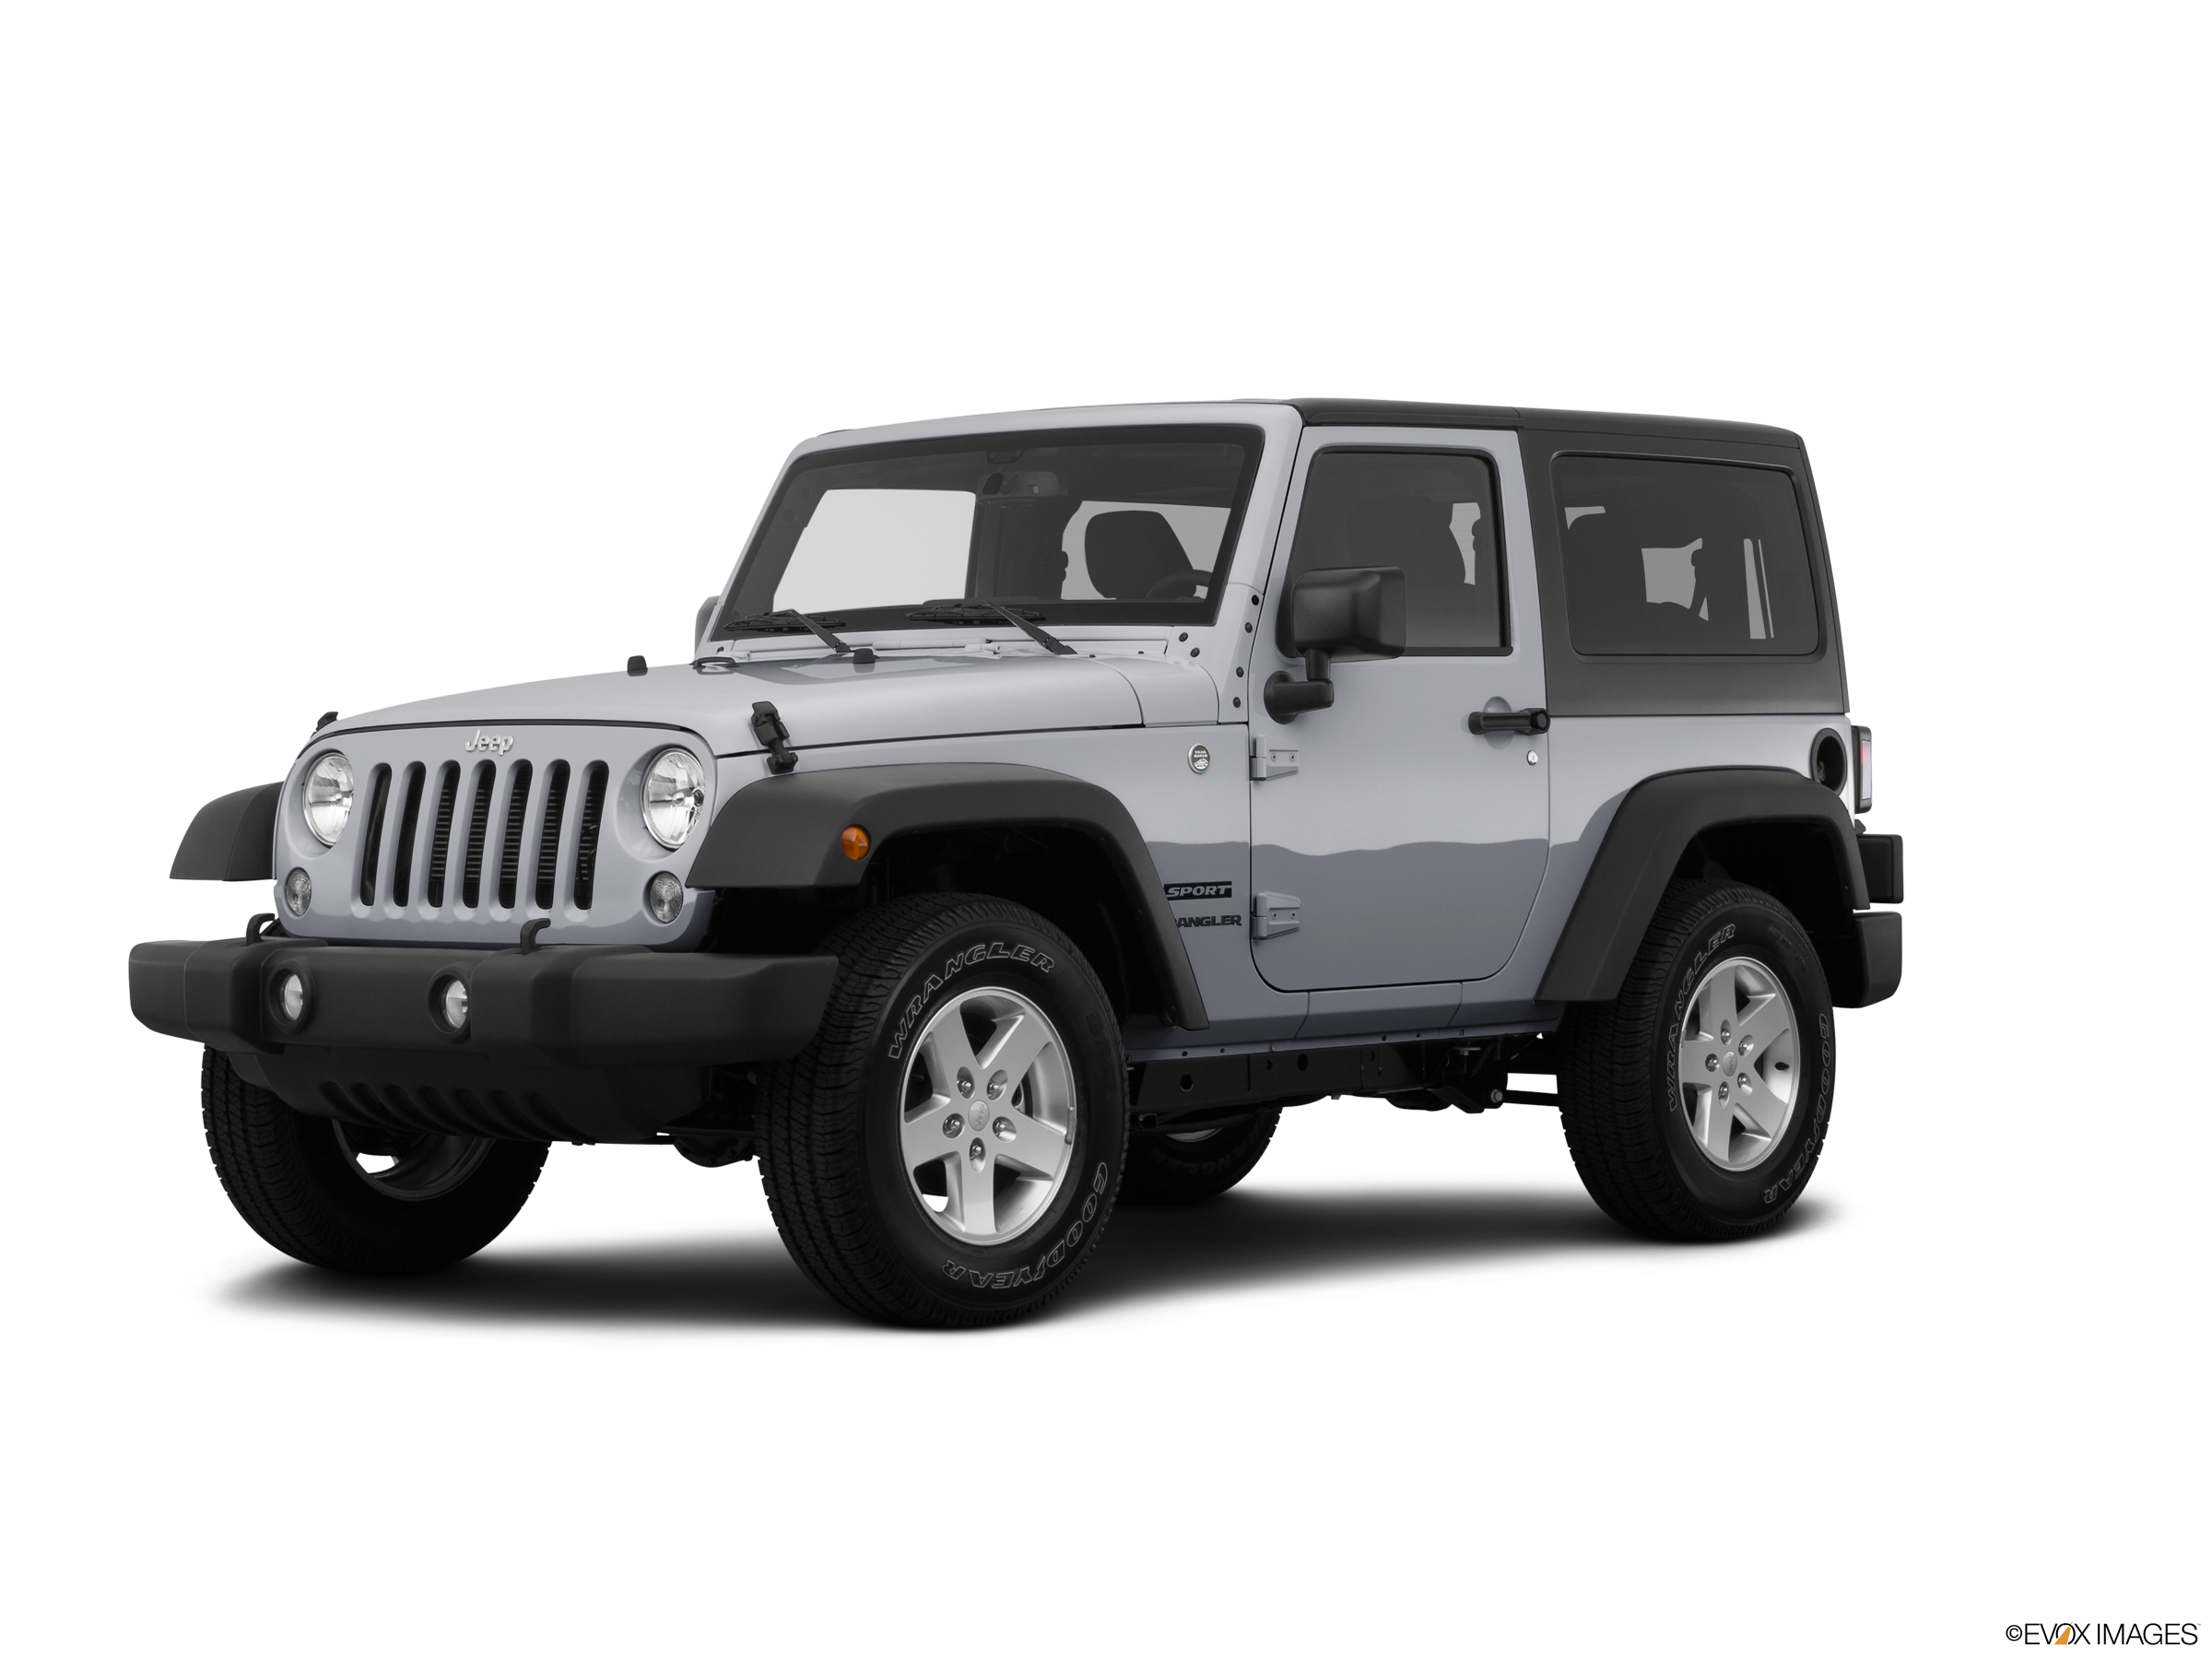 2015 Jeep Wrangler Values & Cars for Sale | Kelley Blue Book